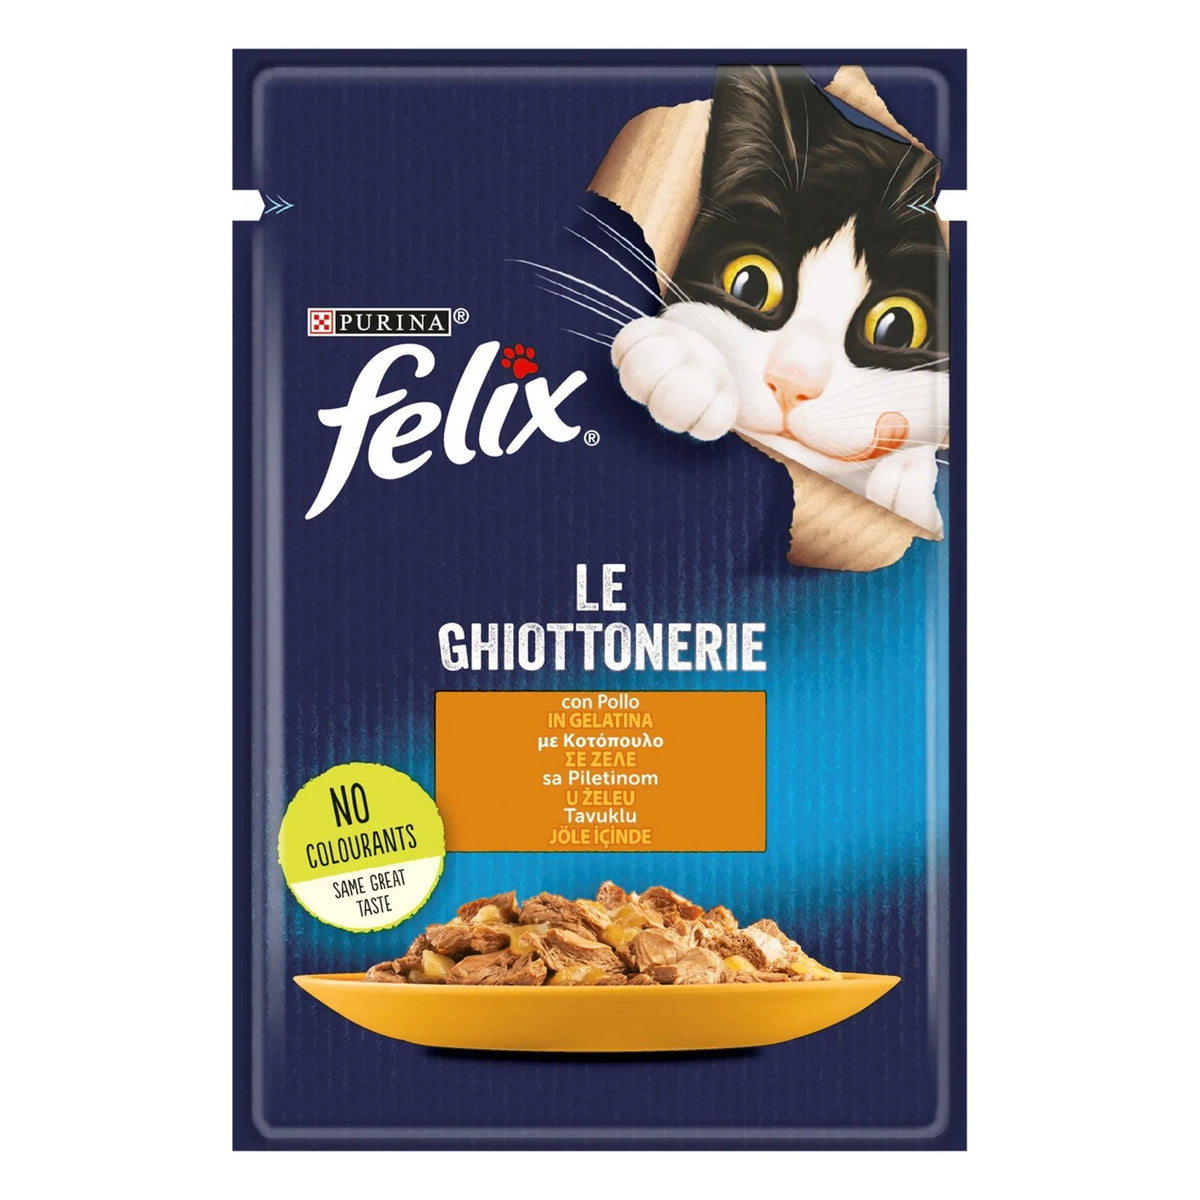 Purina Felix The Ghiottoneries with 85 gr chicken